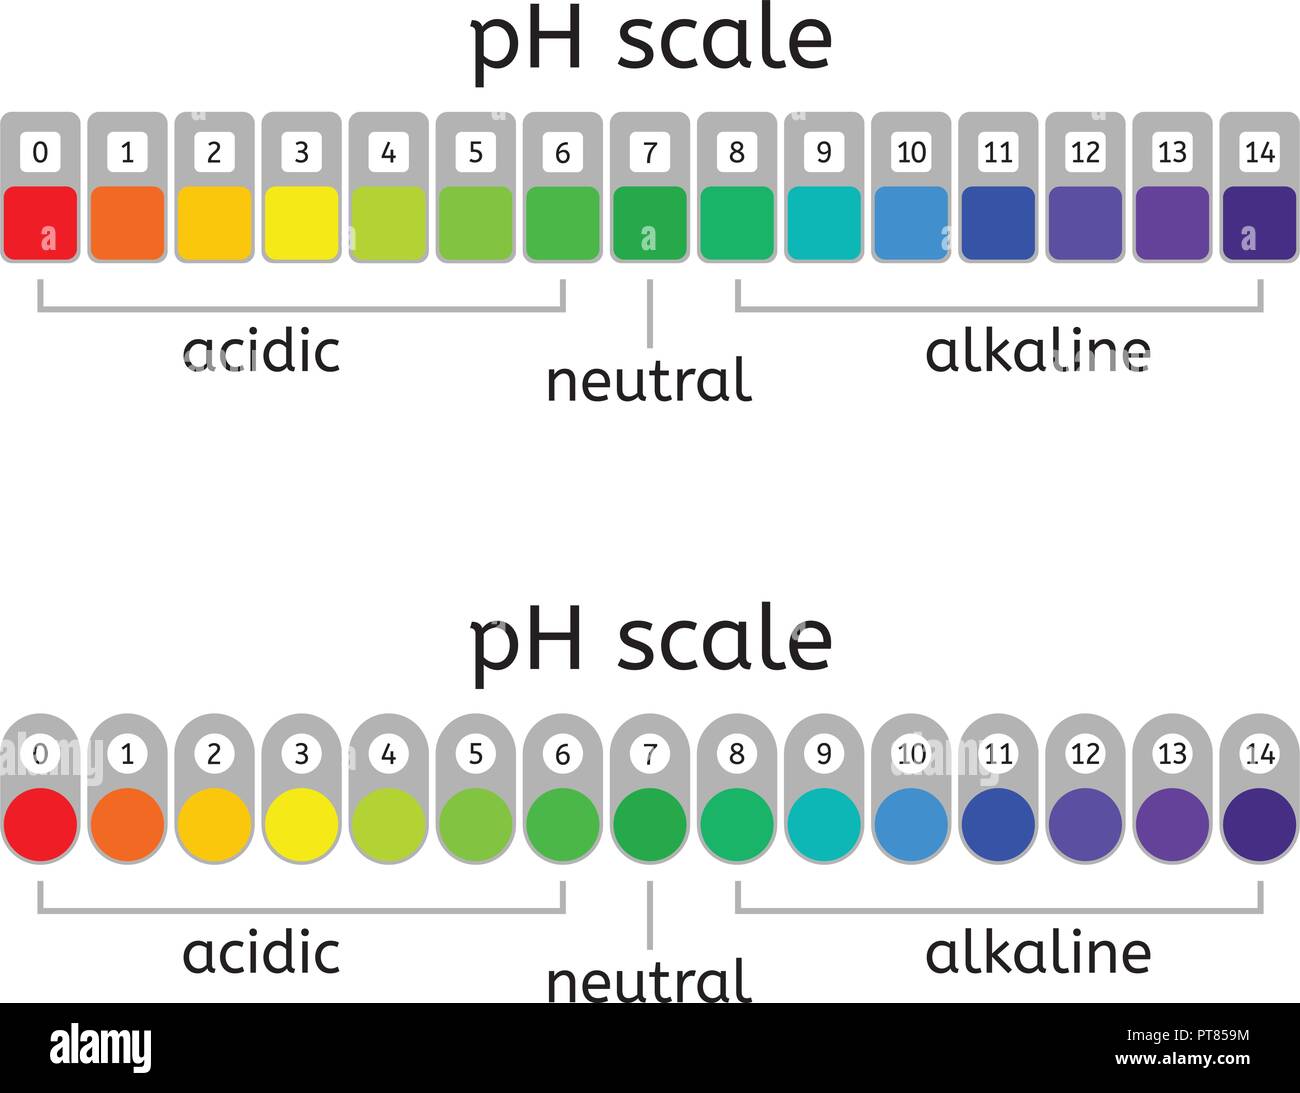 Vector Ph Scale Of Acidic Neutral And Alkaline Value Chart For Acid ...